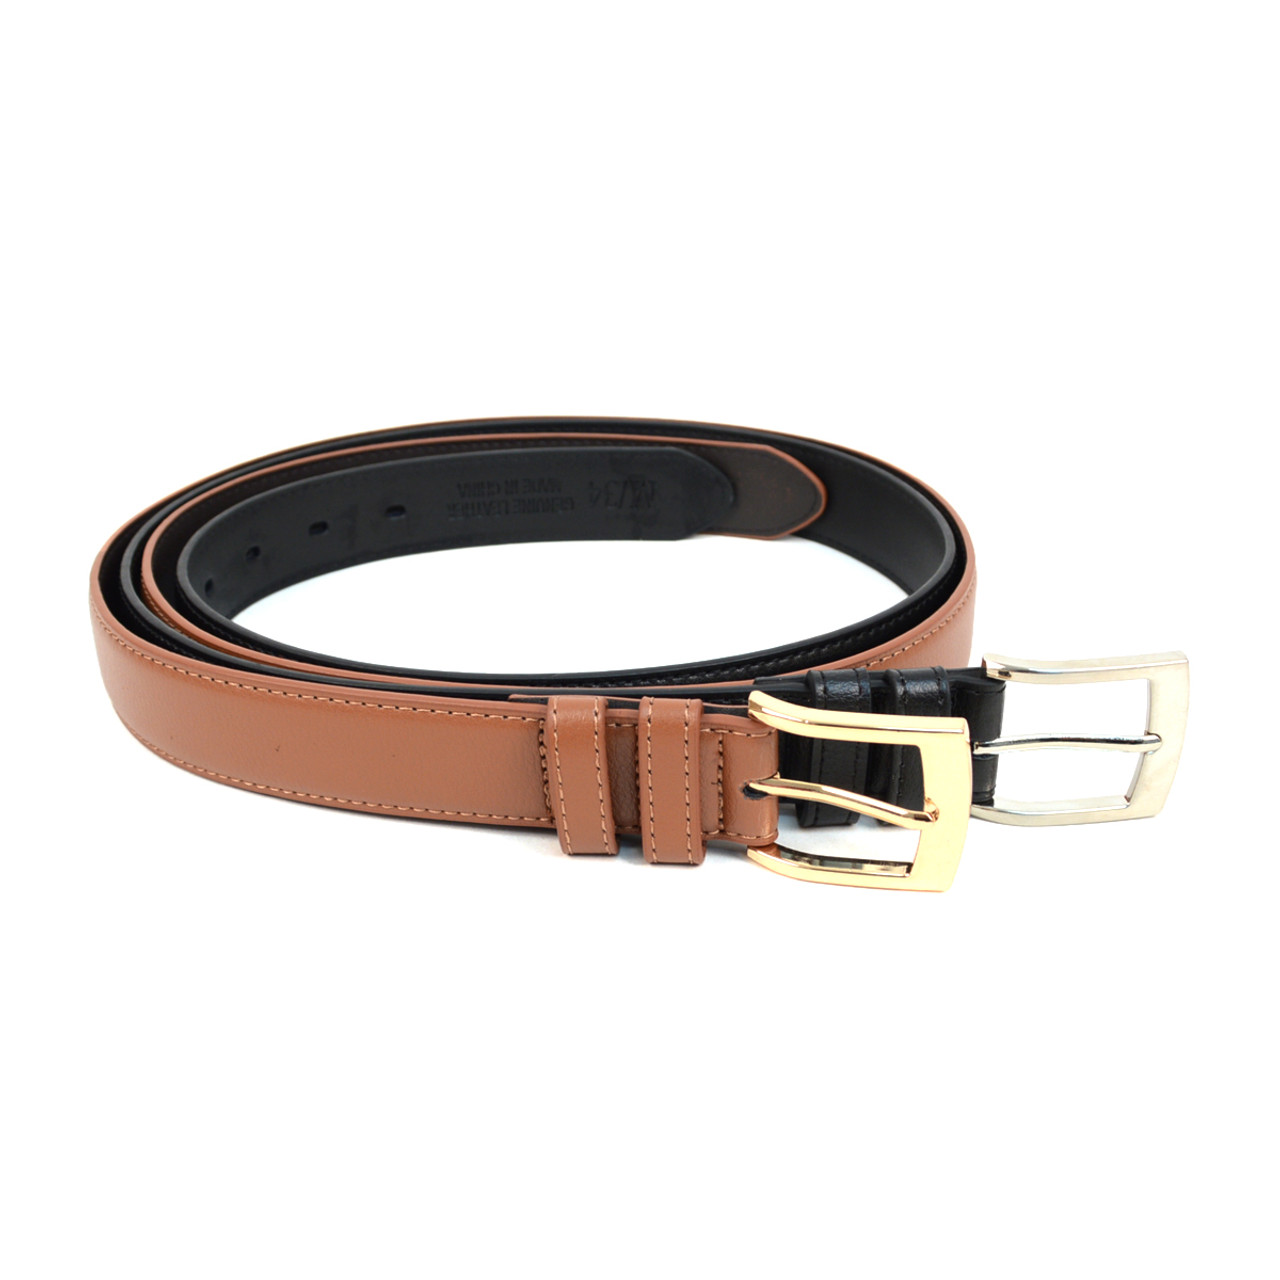 GESMOS Brand Leather Belt Business Trouser Strap Genuine Leather